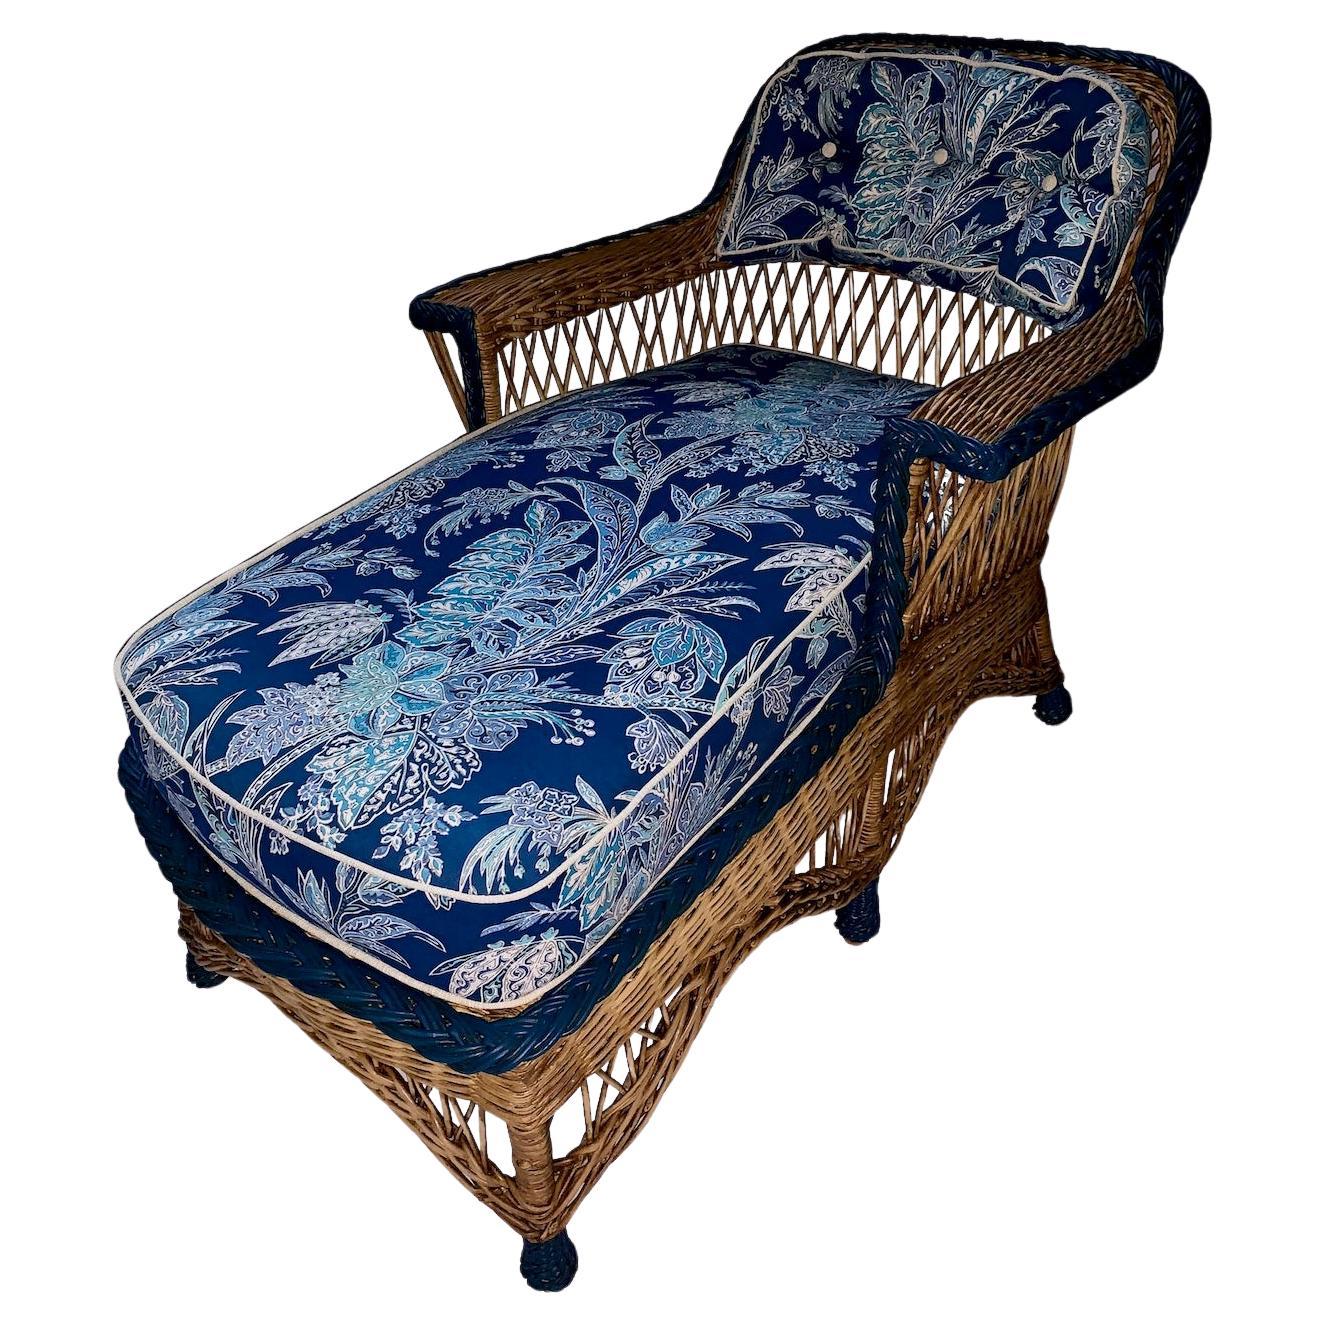 A Wicker Bar Harbor Style Chaise Lounge, Natural Finish mit Navy Blue Trim